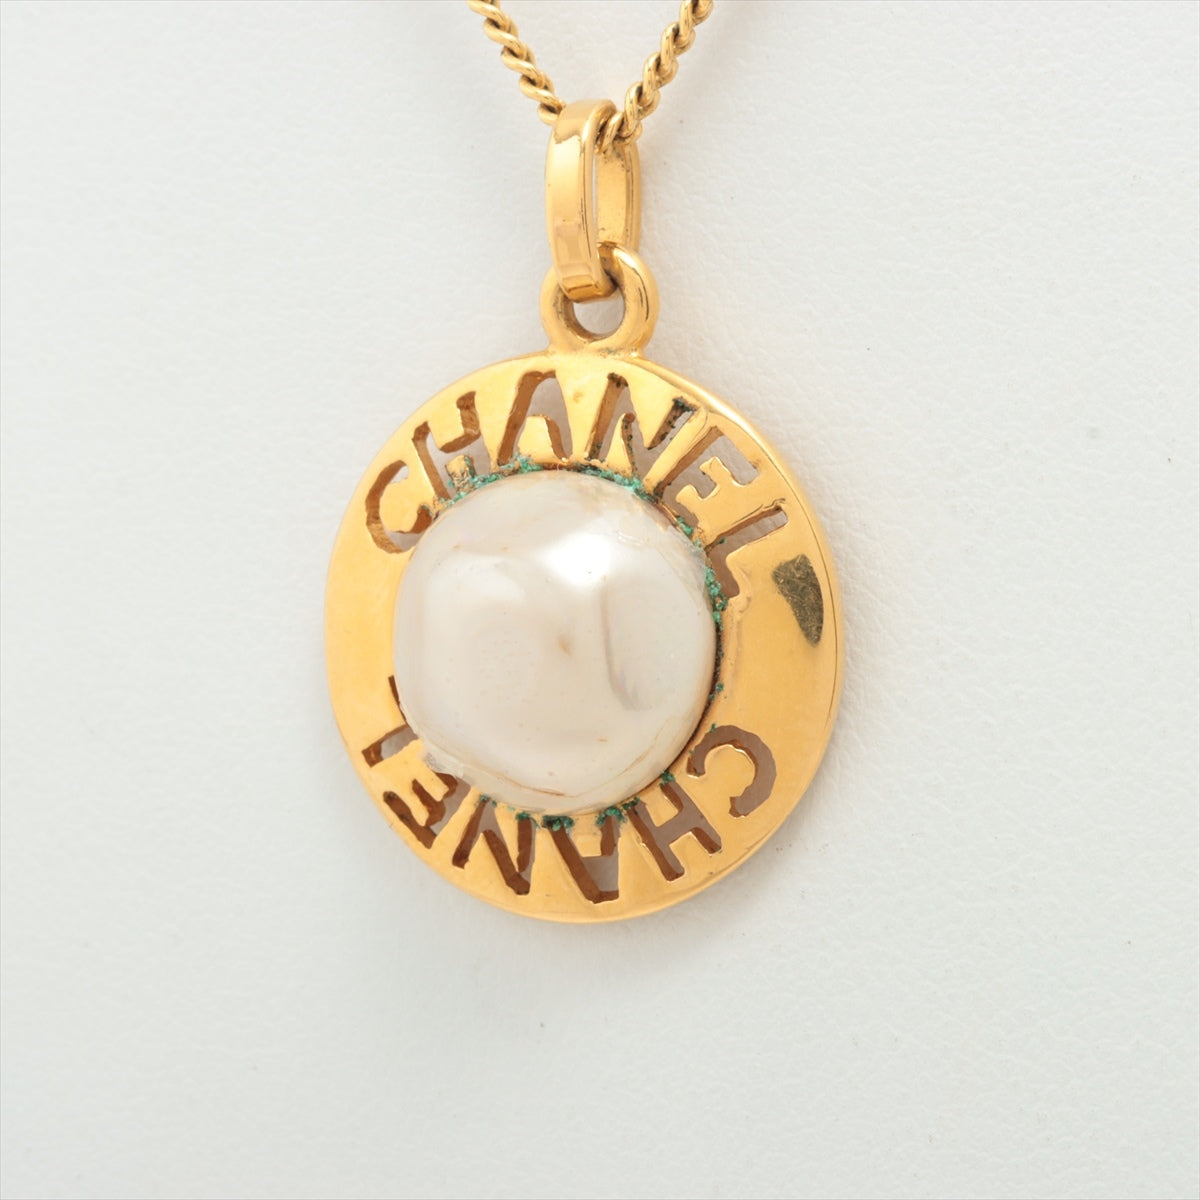 Chanel Necklace GP x Imitation pearl Gold Scratched Discoloration Marked Oxidation staining Peel off